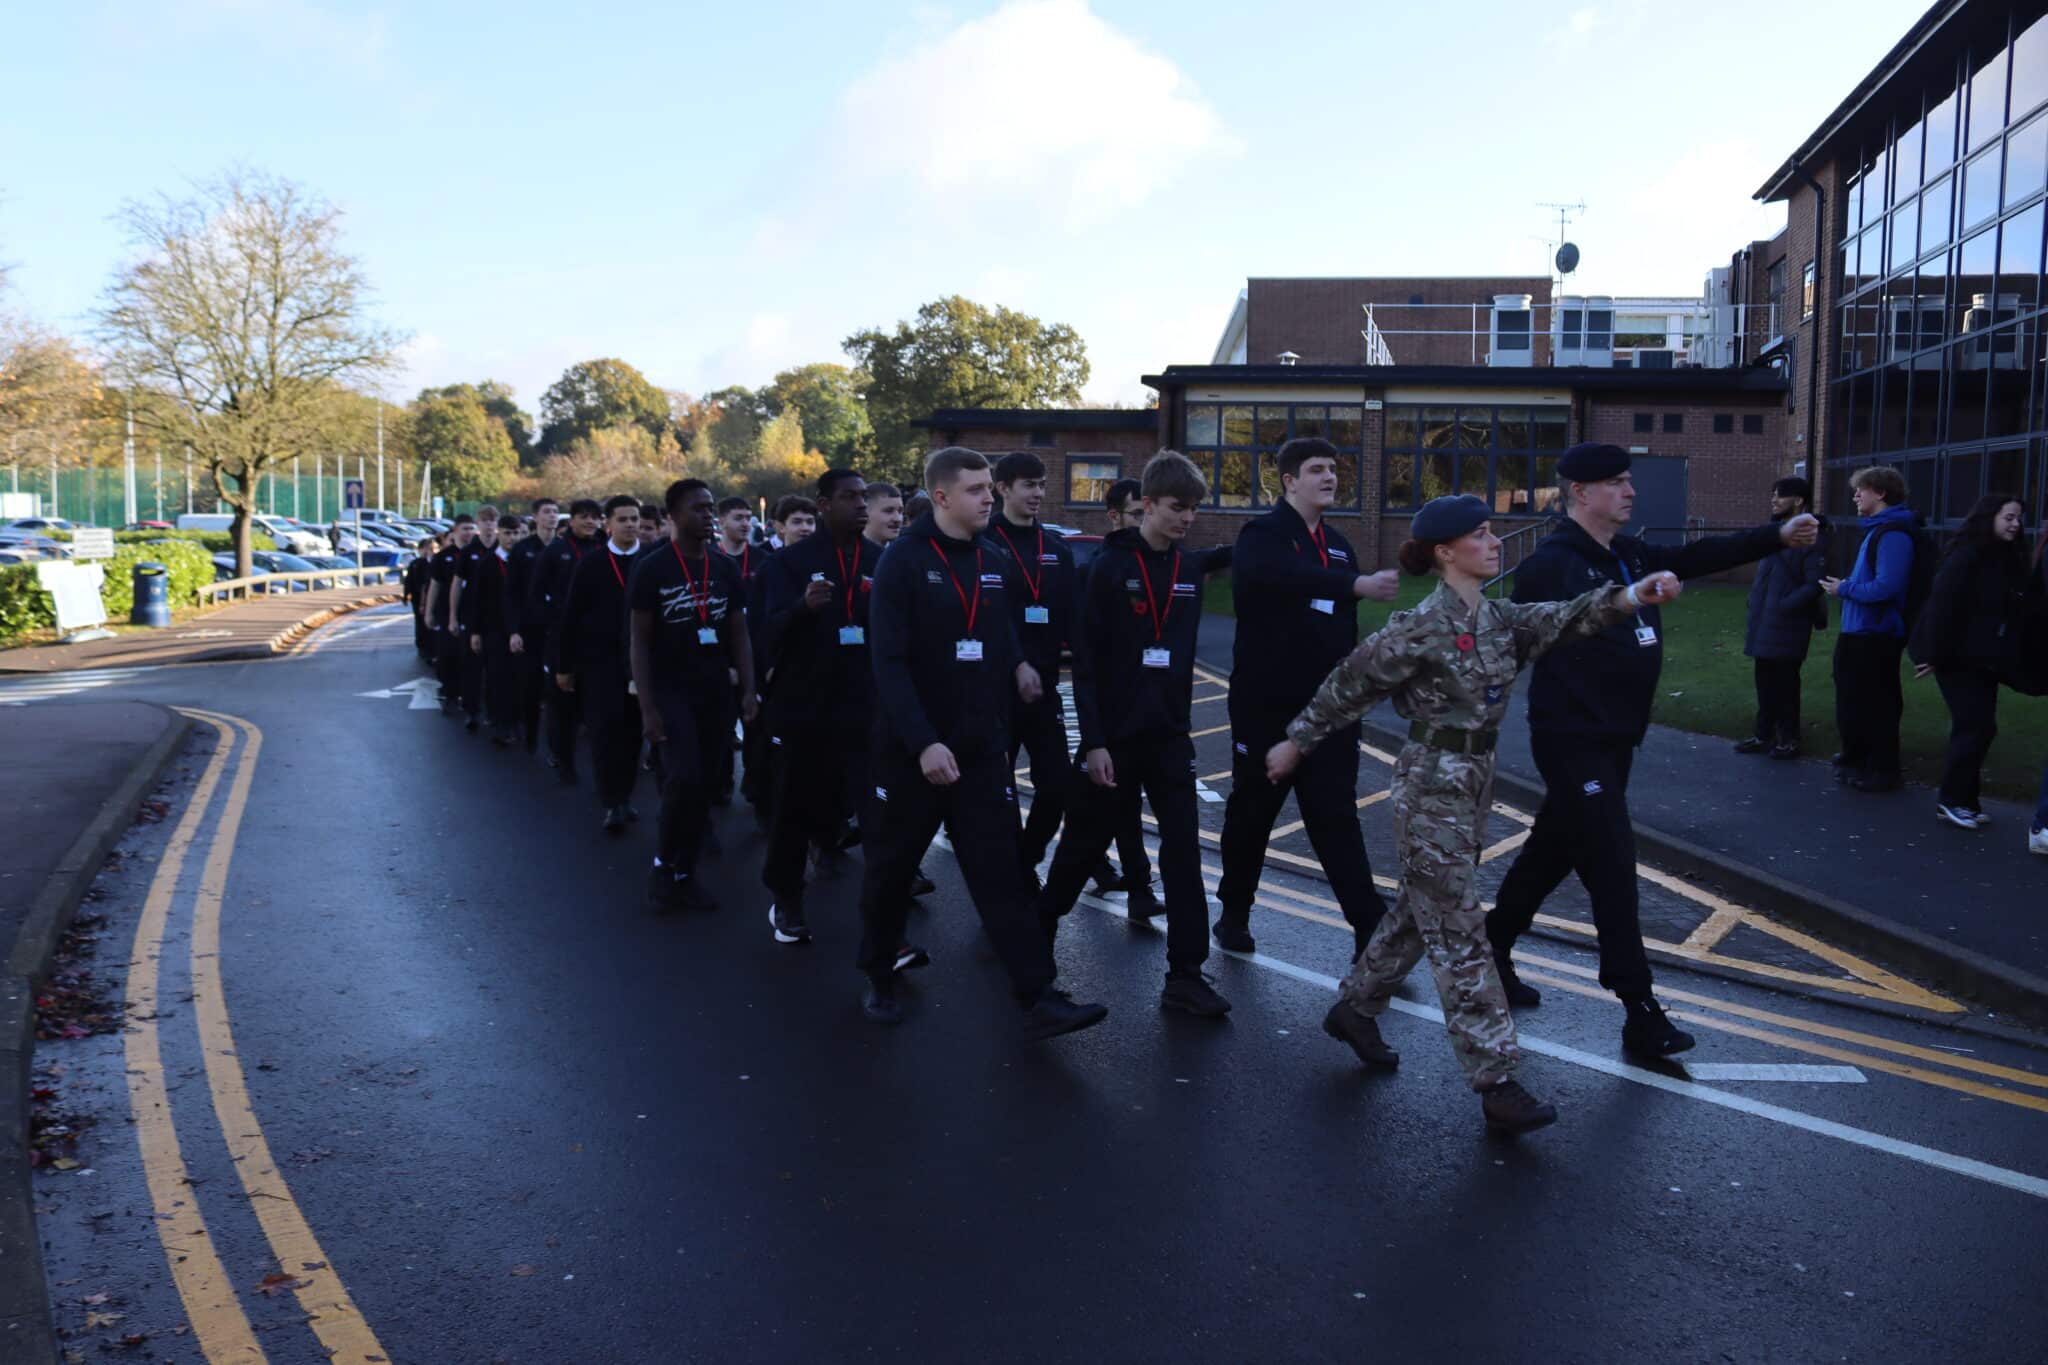 students marching on the annual Remembrance Day parade